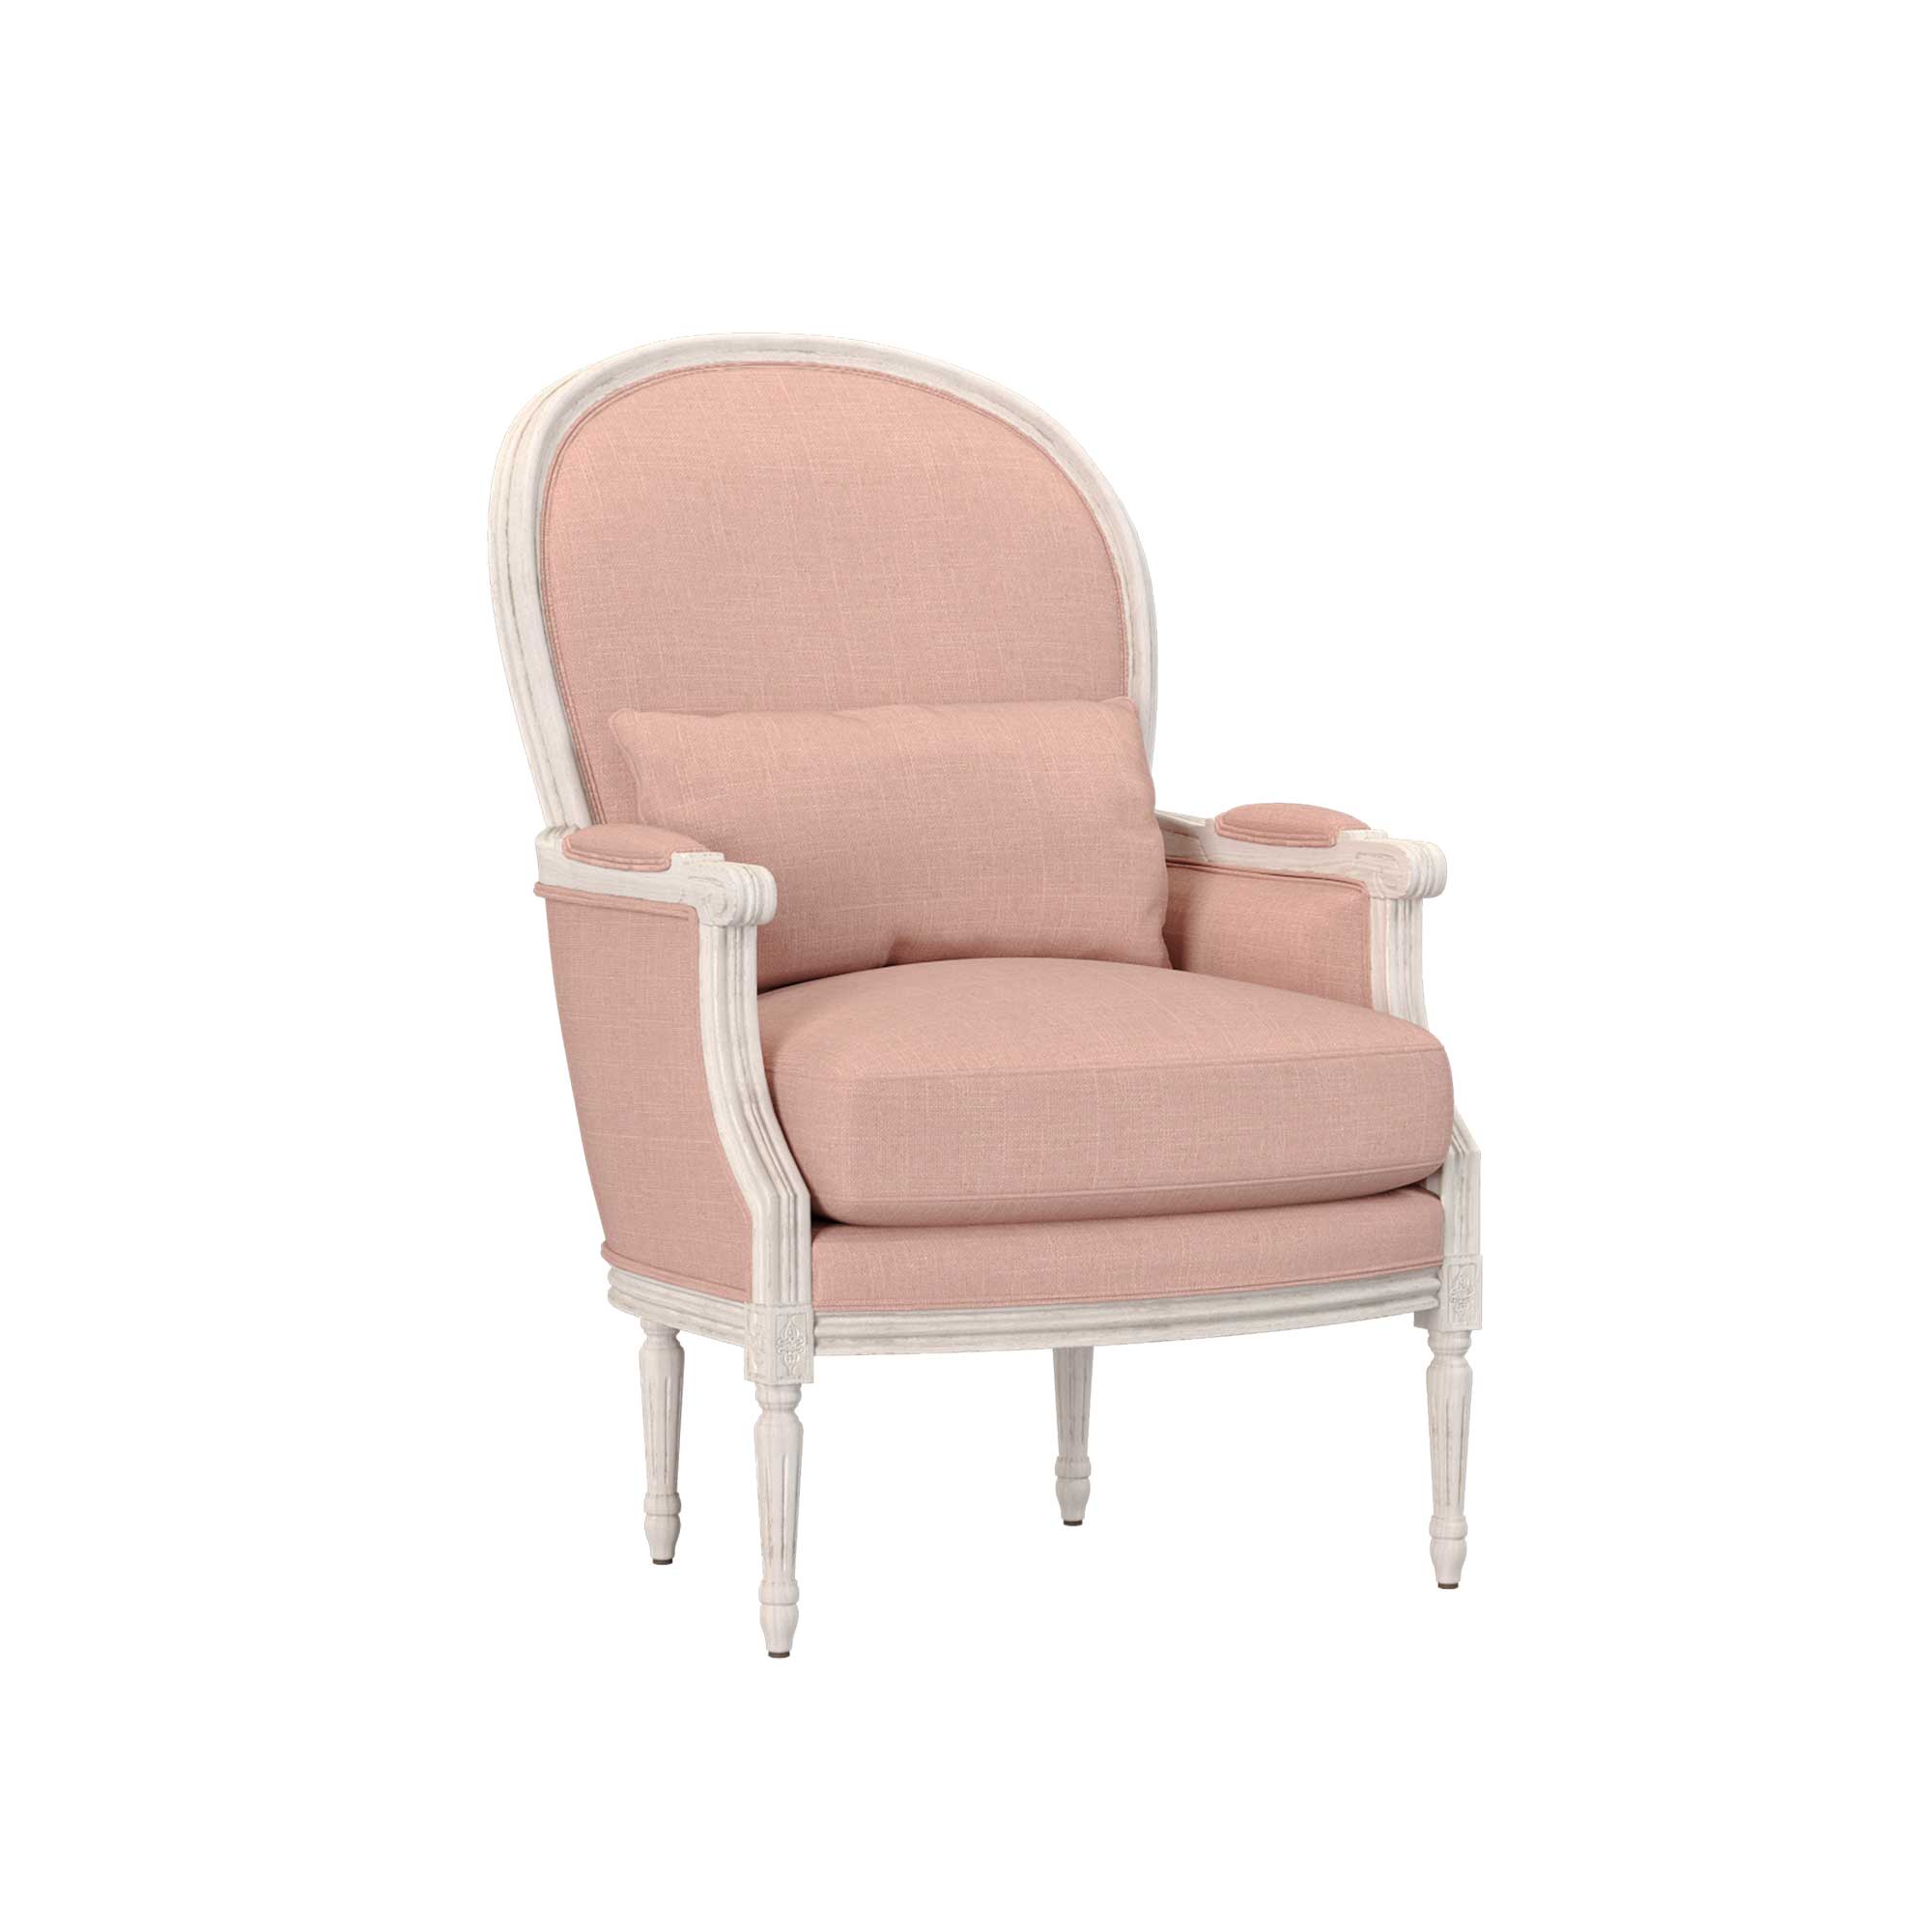 Adele Lounge Chair in Blush Pink